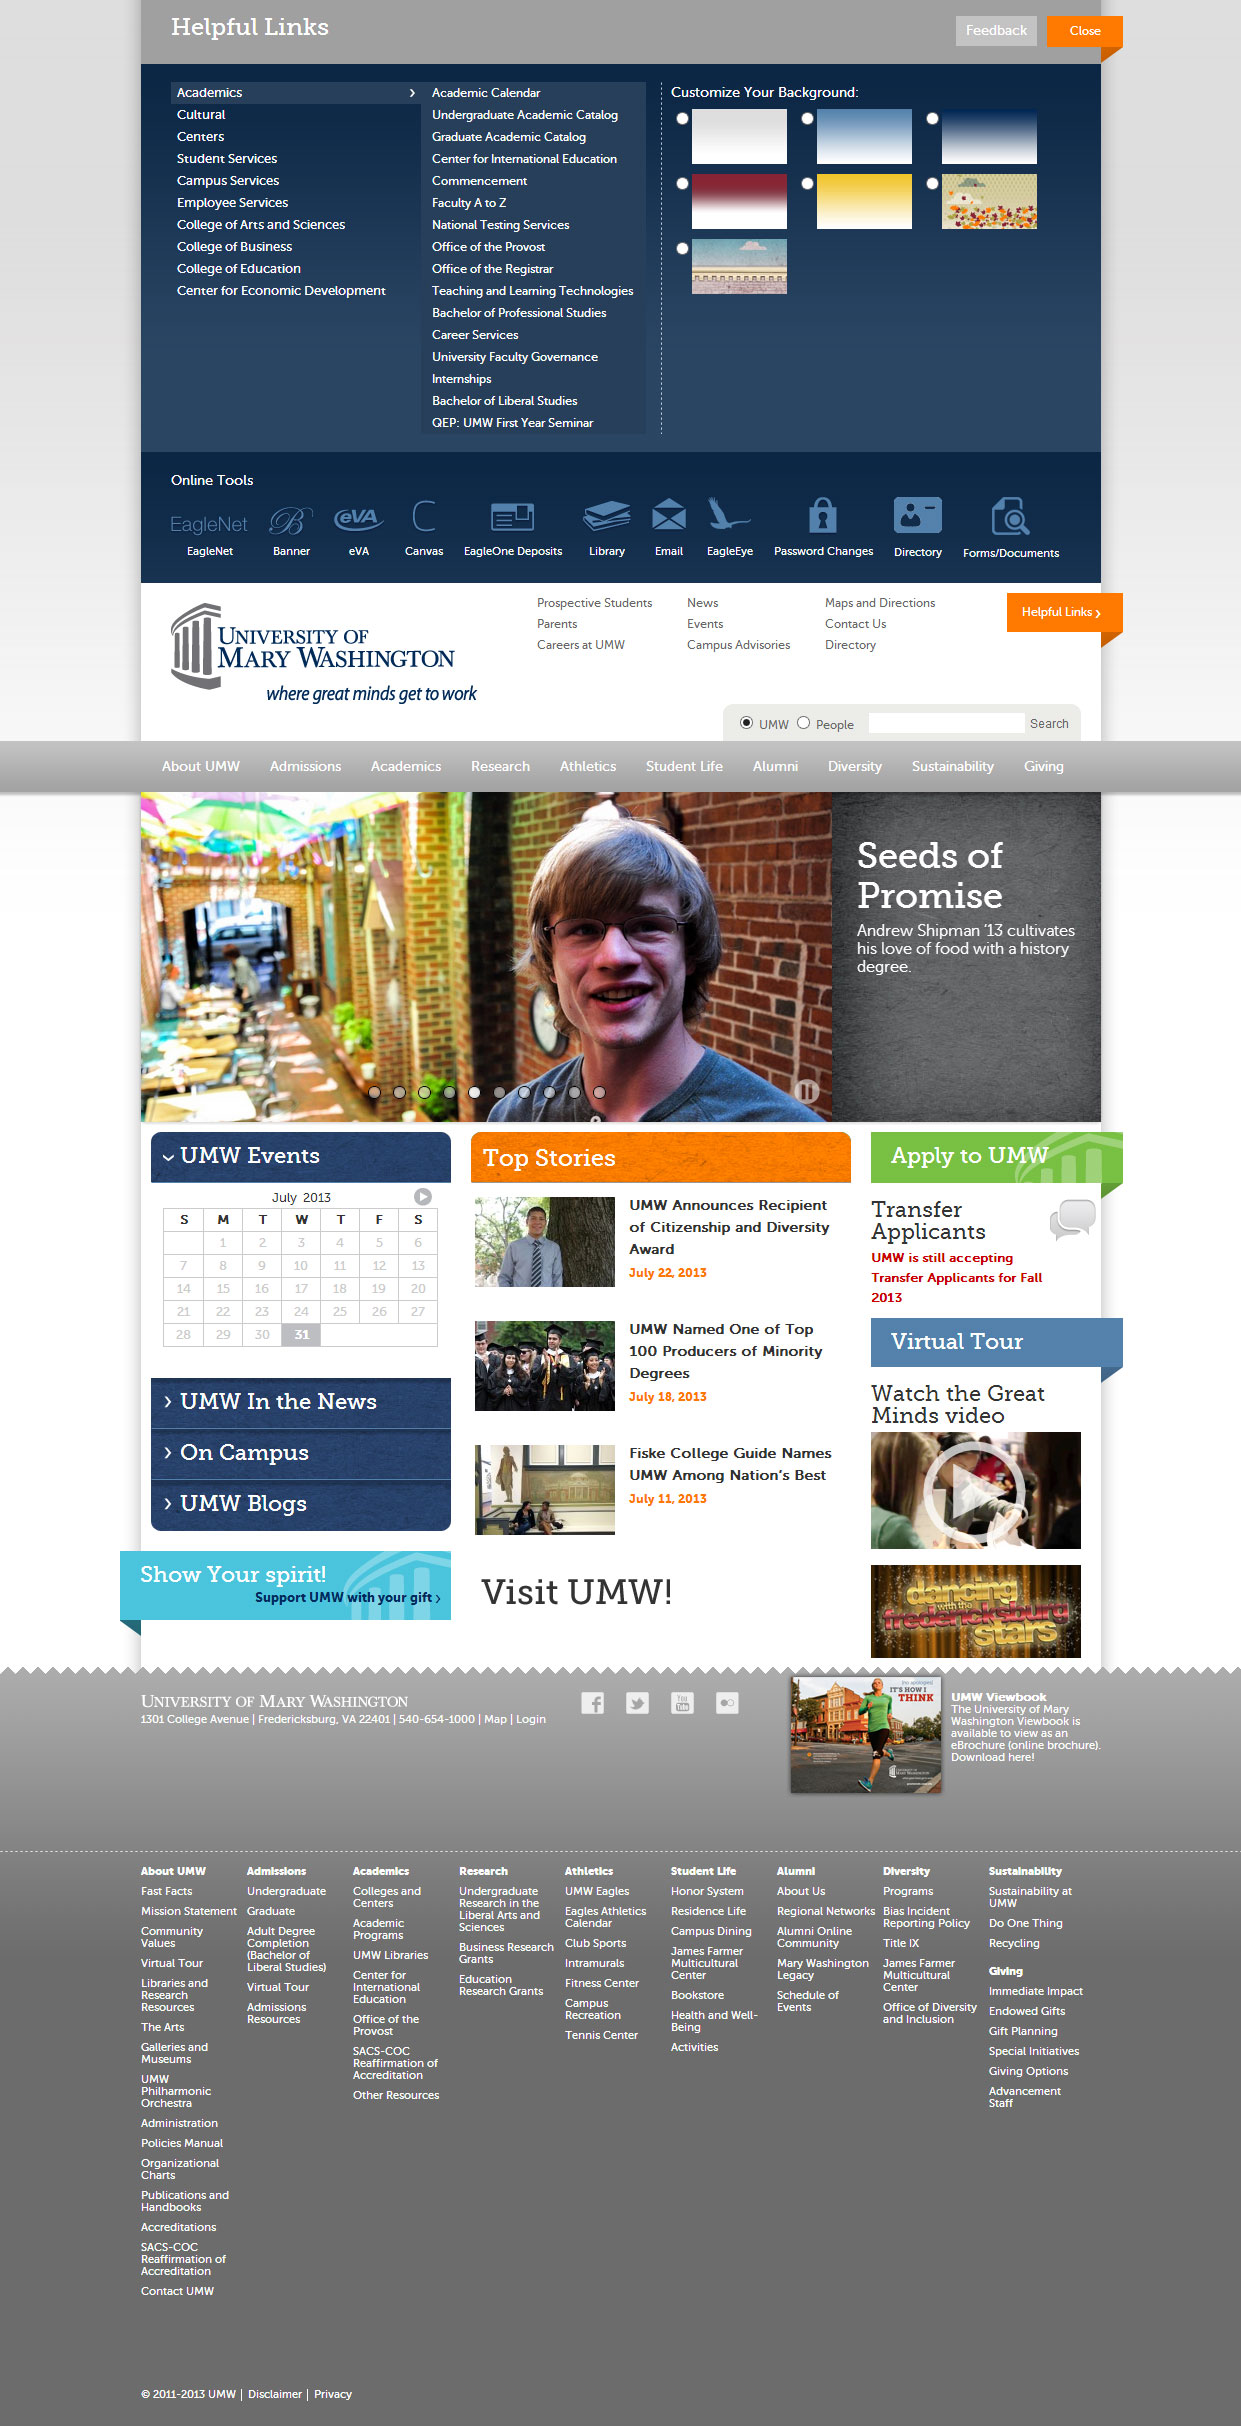 The full UMW home page